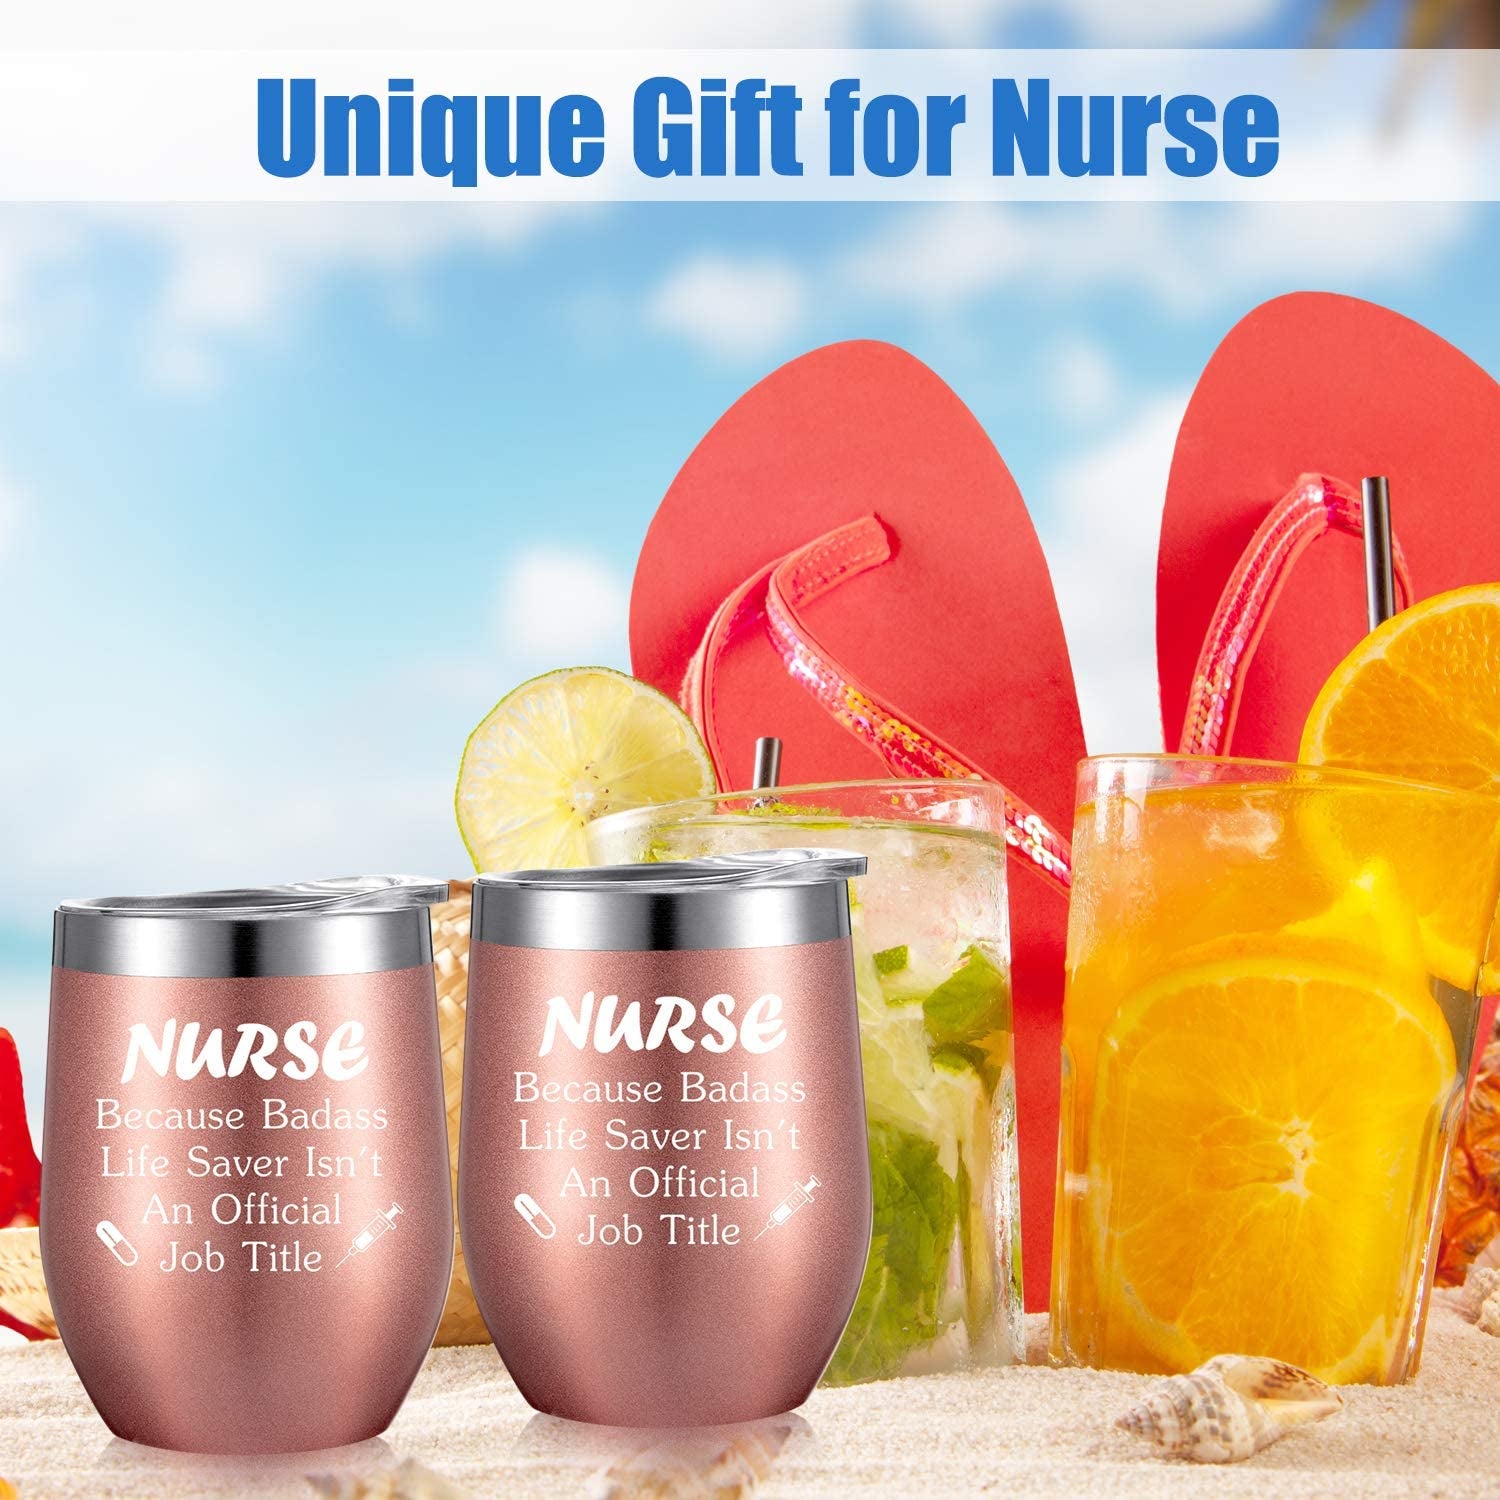 2 Pieces Nurse Gifts for Women 12 Oz Wine Tumbler Christmas Appreciation Nursing Graduation Funny Present with Straw and Brush for Nurse Practitioner, Nurse Student (Rose Gold)